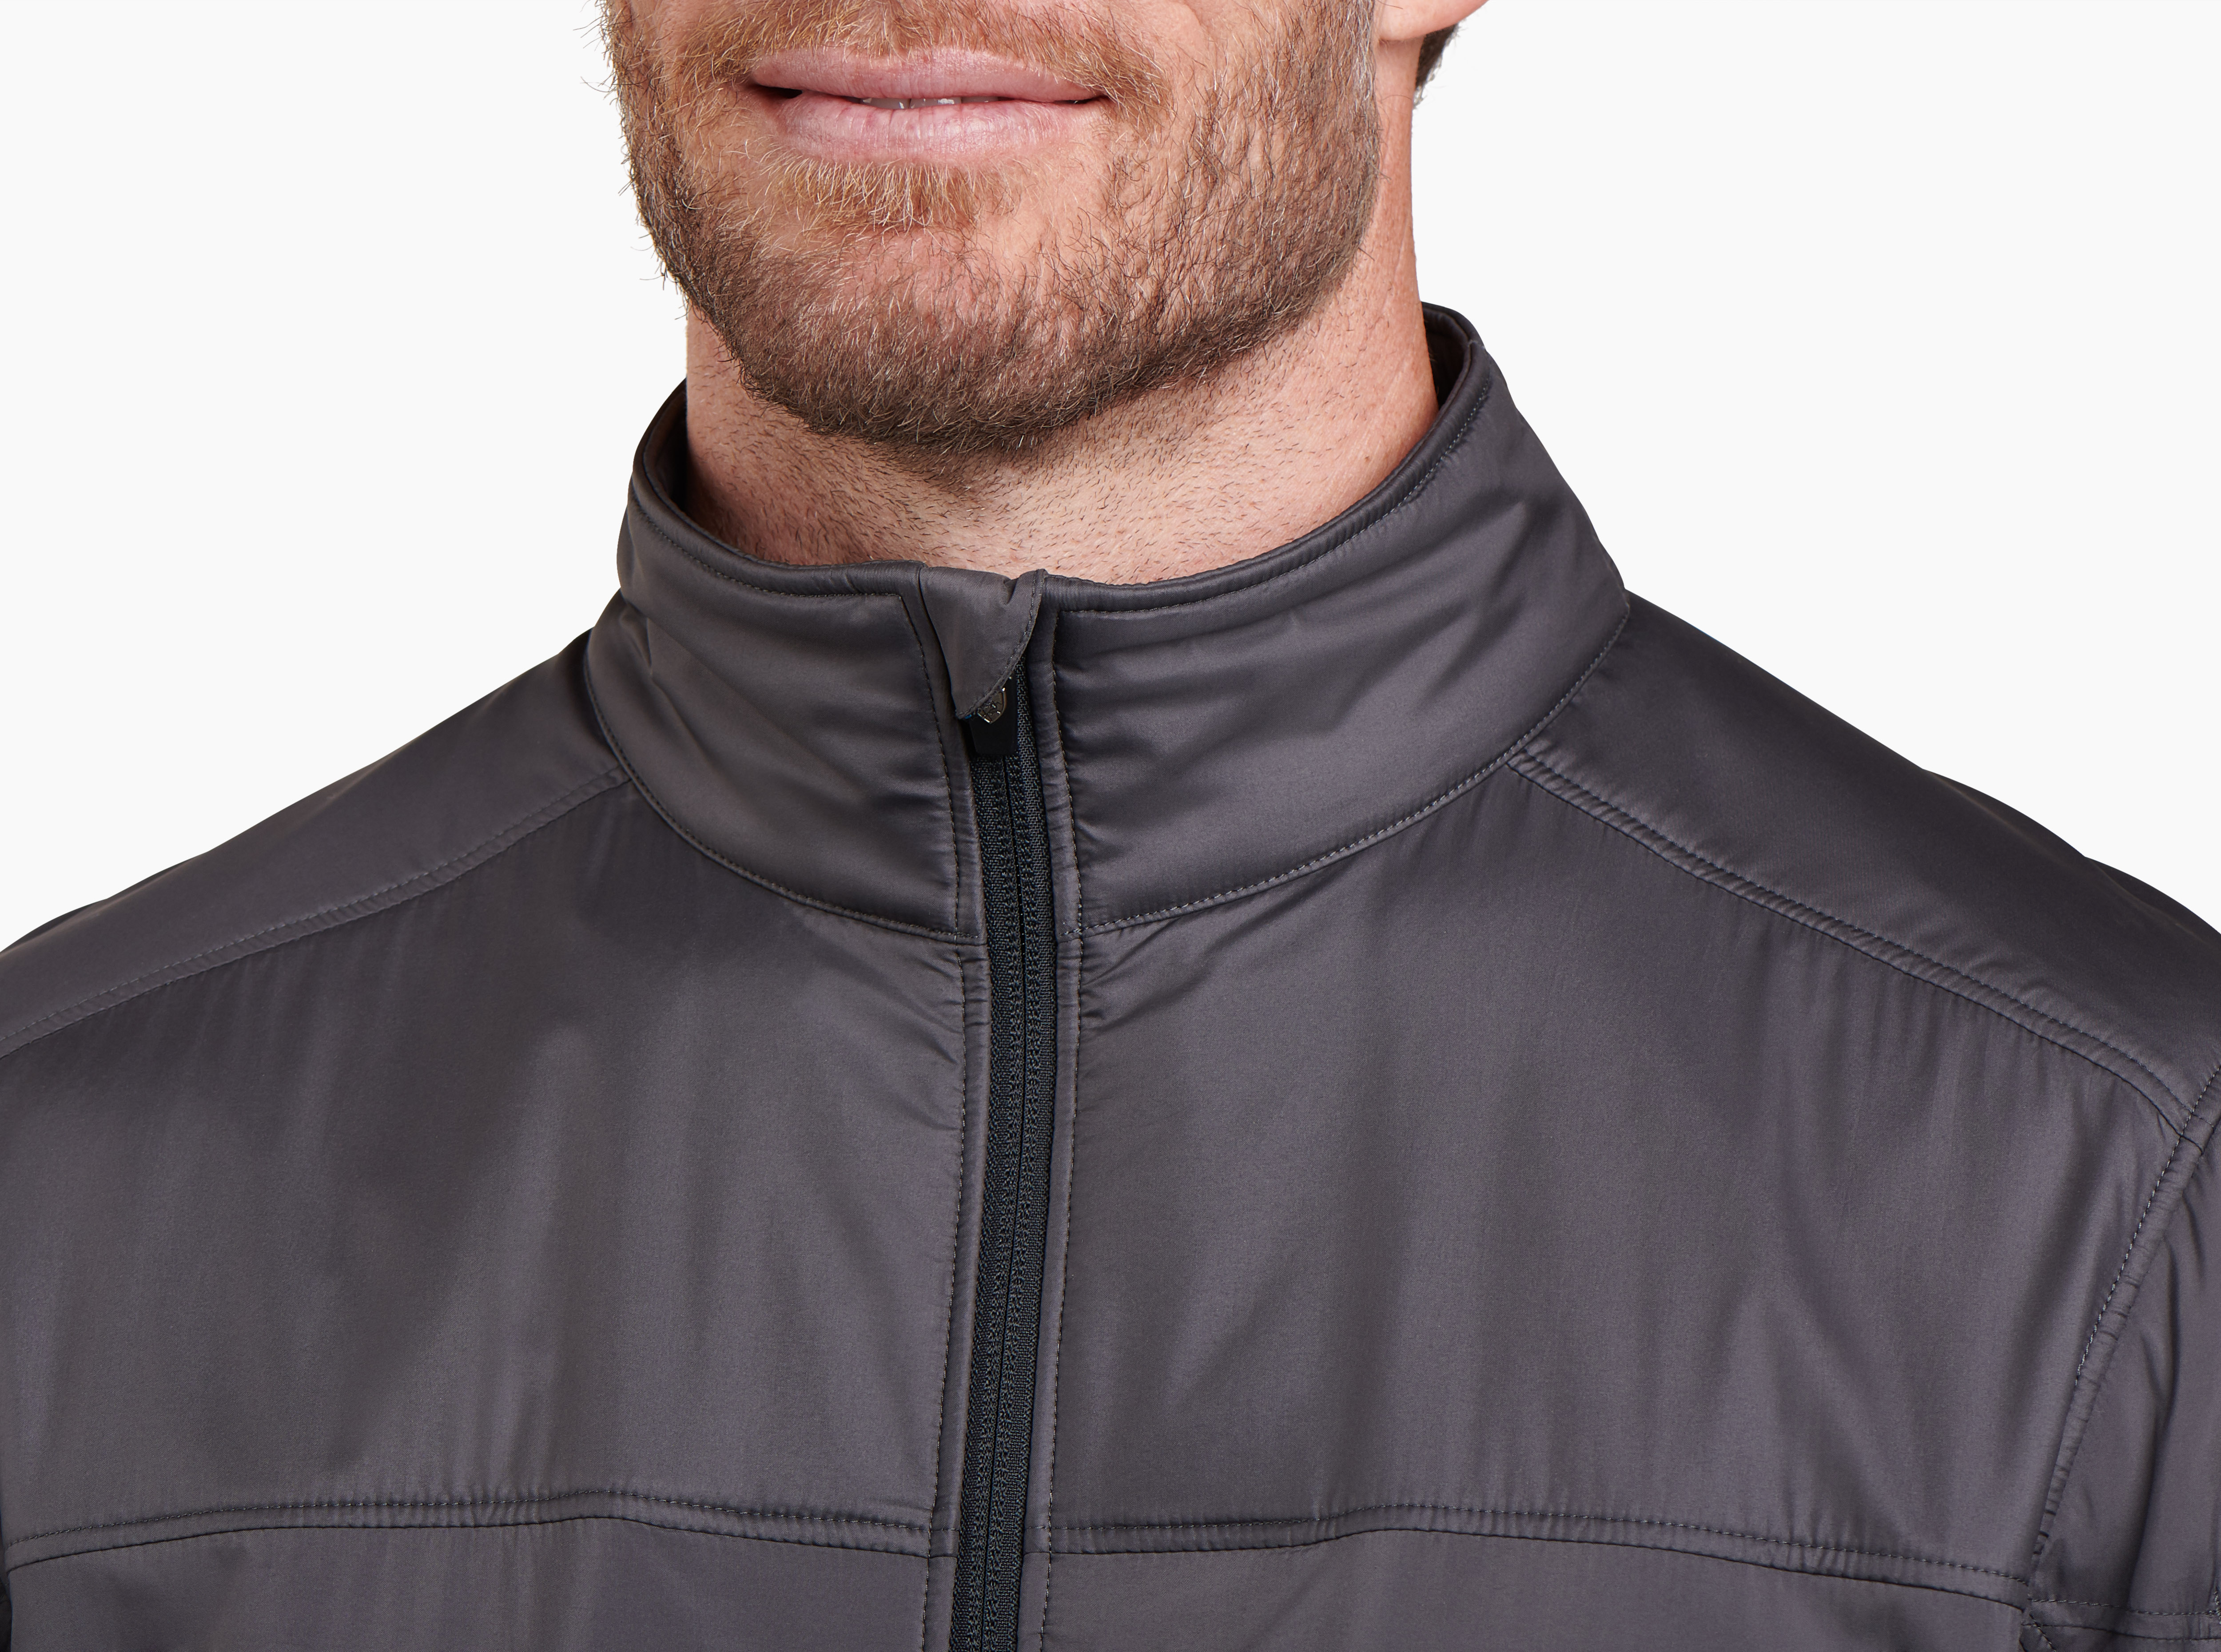 The One™ Jacket in Men's Outerwear